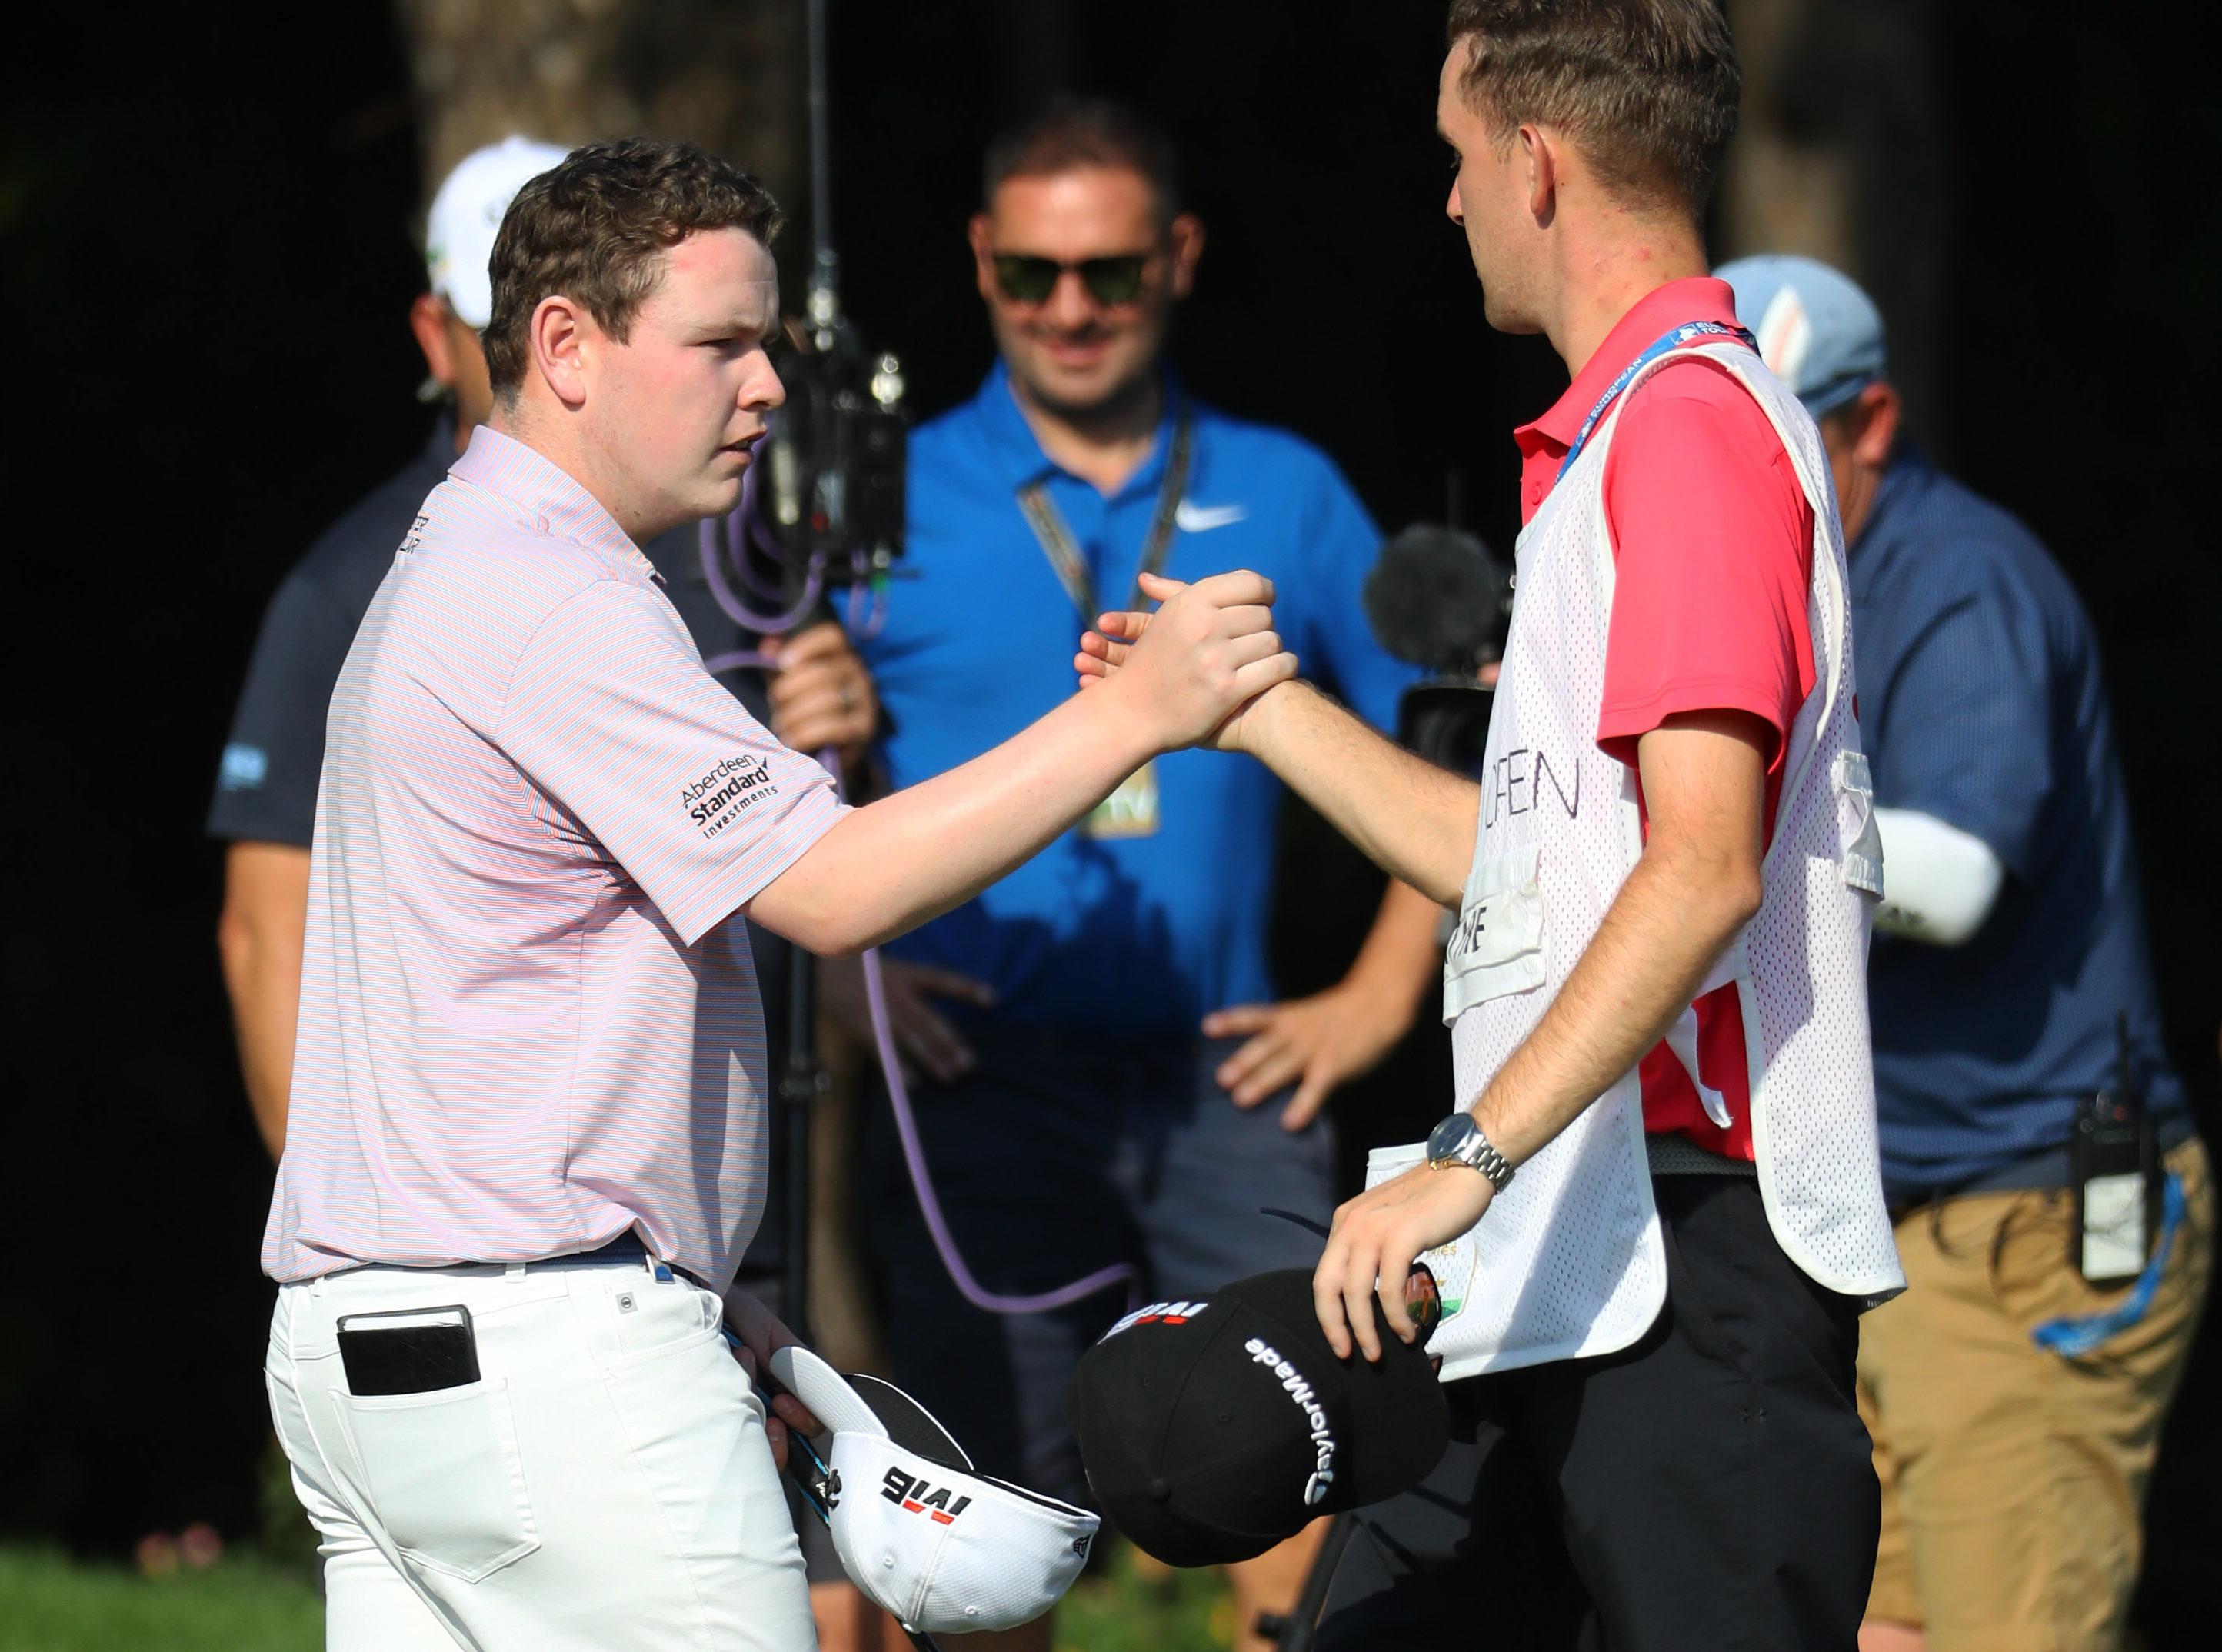 Robert MacIntyre of Scotland shakes hands with his caddie after playing his final shot on the ninth during Day Two of the Turkish Airlines Open at The Montgomerie Maxx Royal on November 08, 2019 in Belek, Turkey.